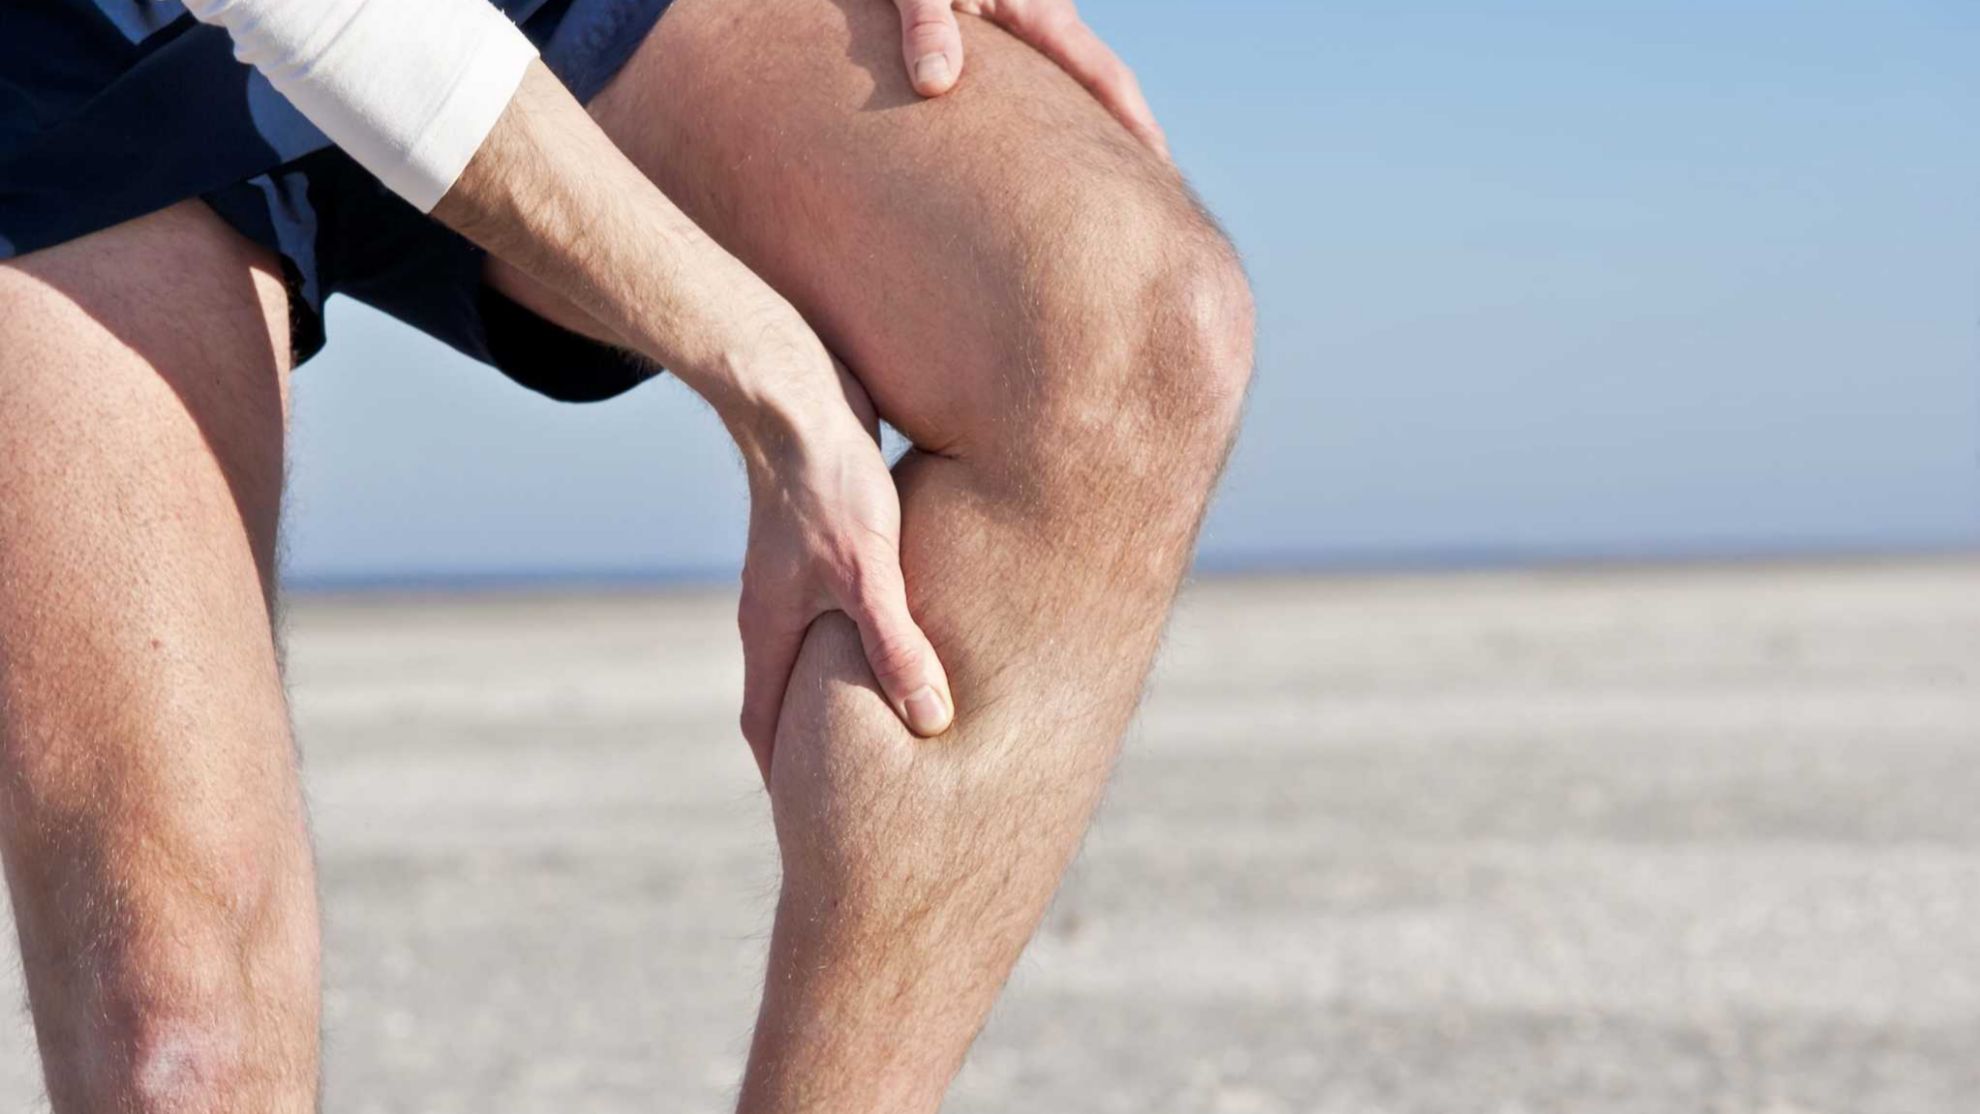 Calf Muscle Pain: How to get rid of Calf Cramps?